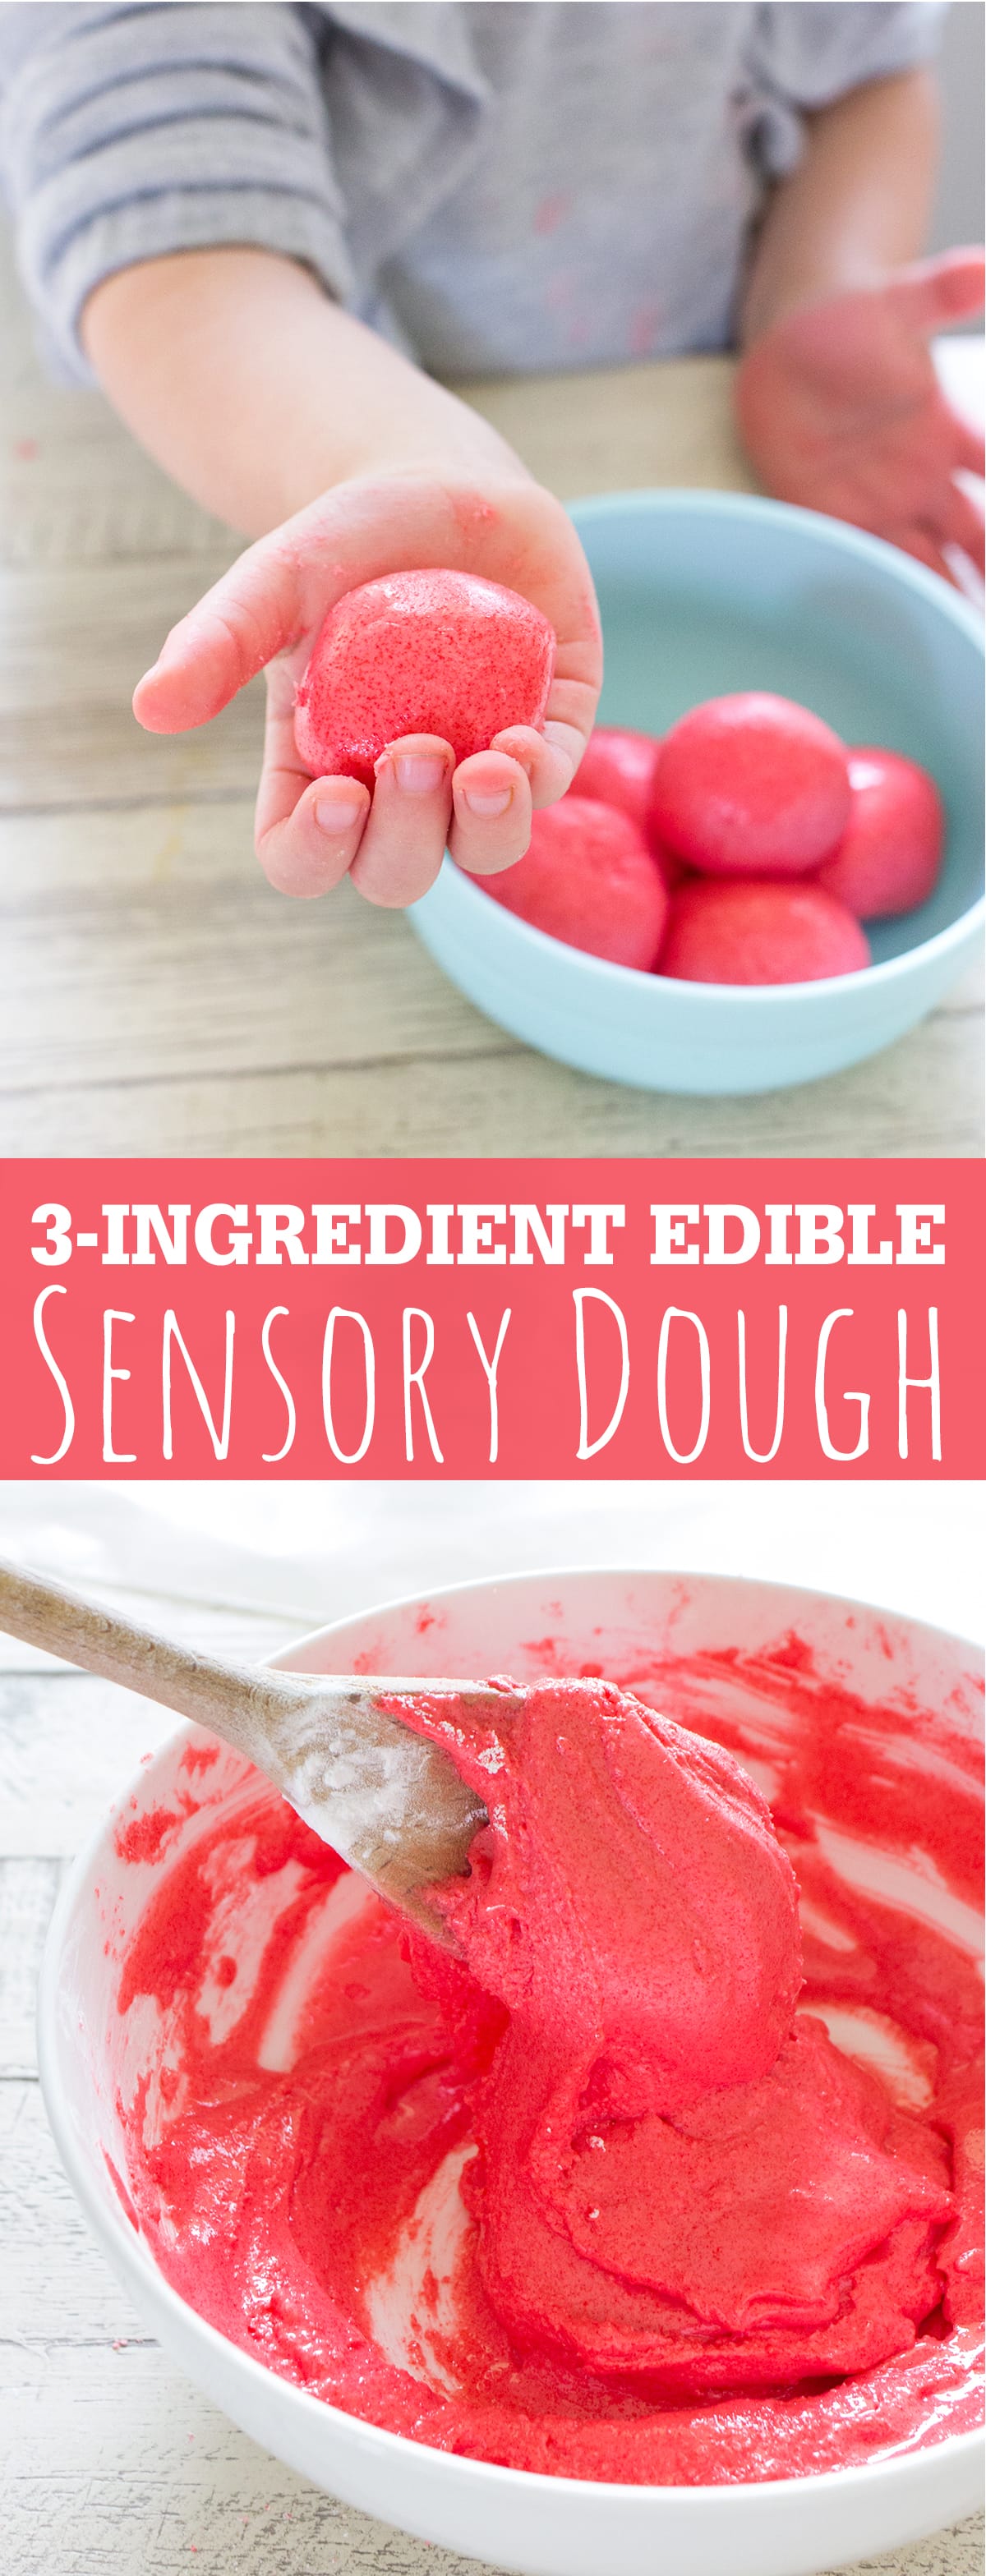 Play. Taste. Smell. Why You Should Make Your Own Play Dough (plus it's  easy!) — 3 Little Plums